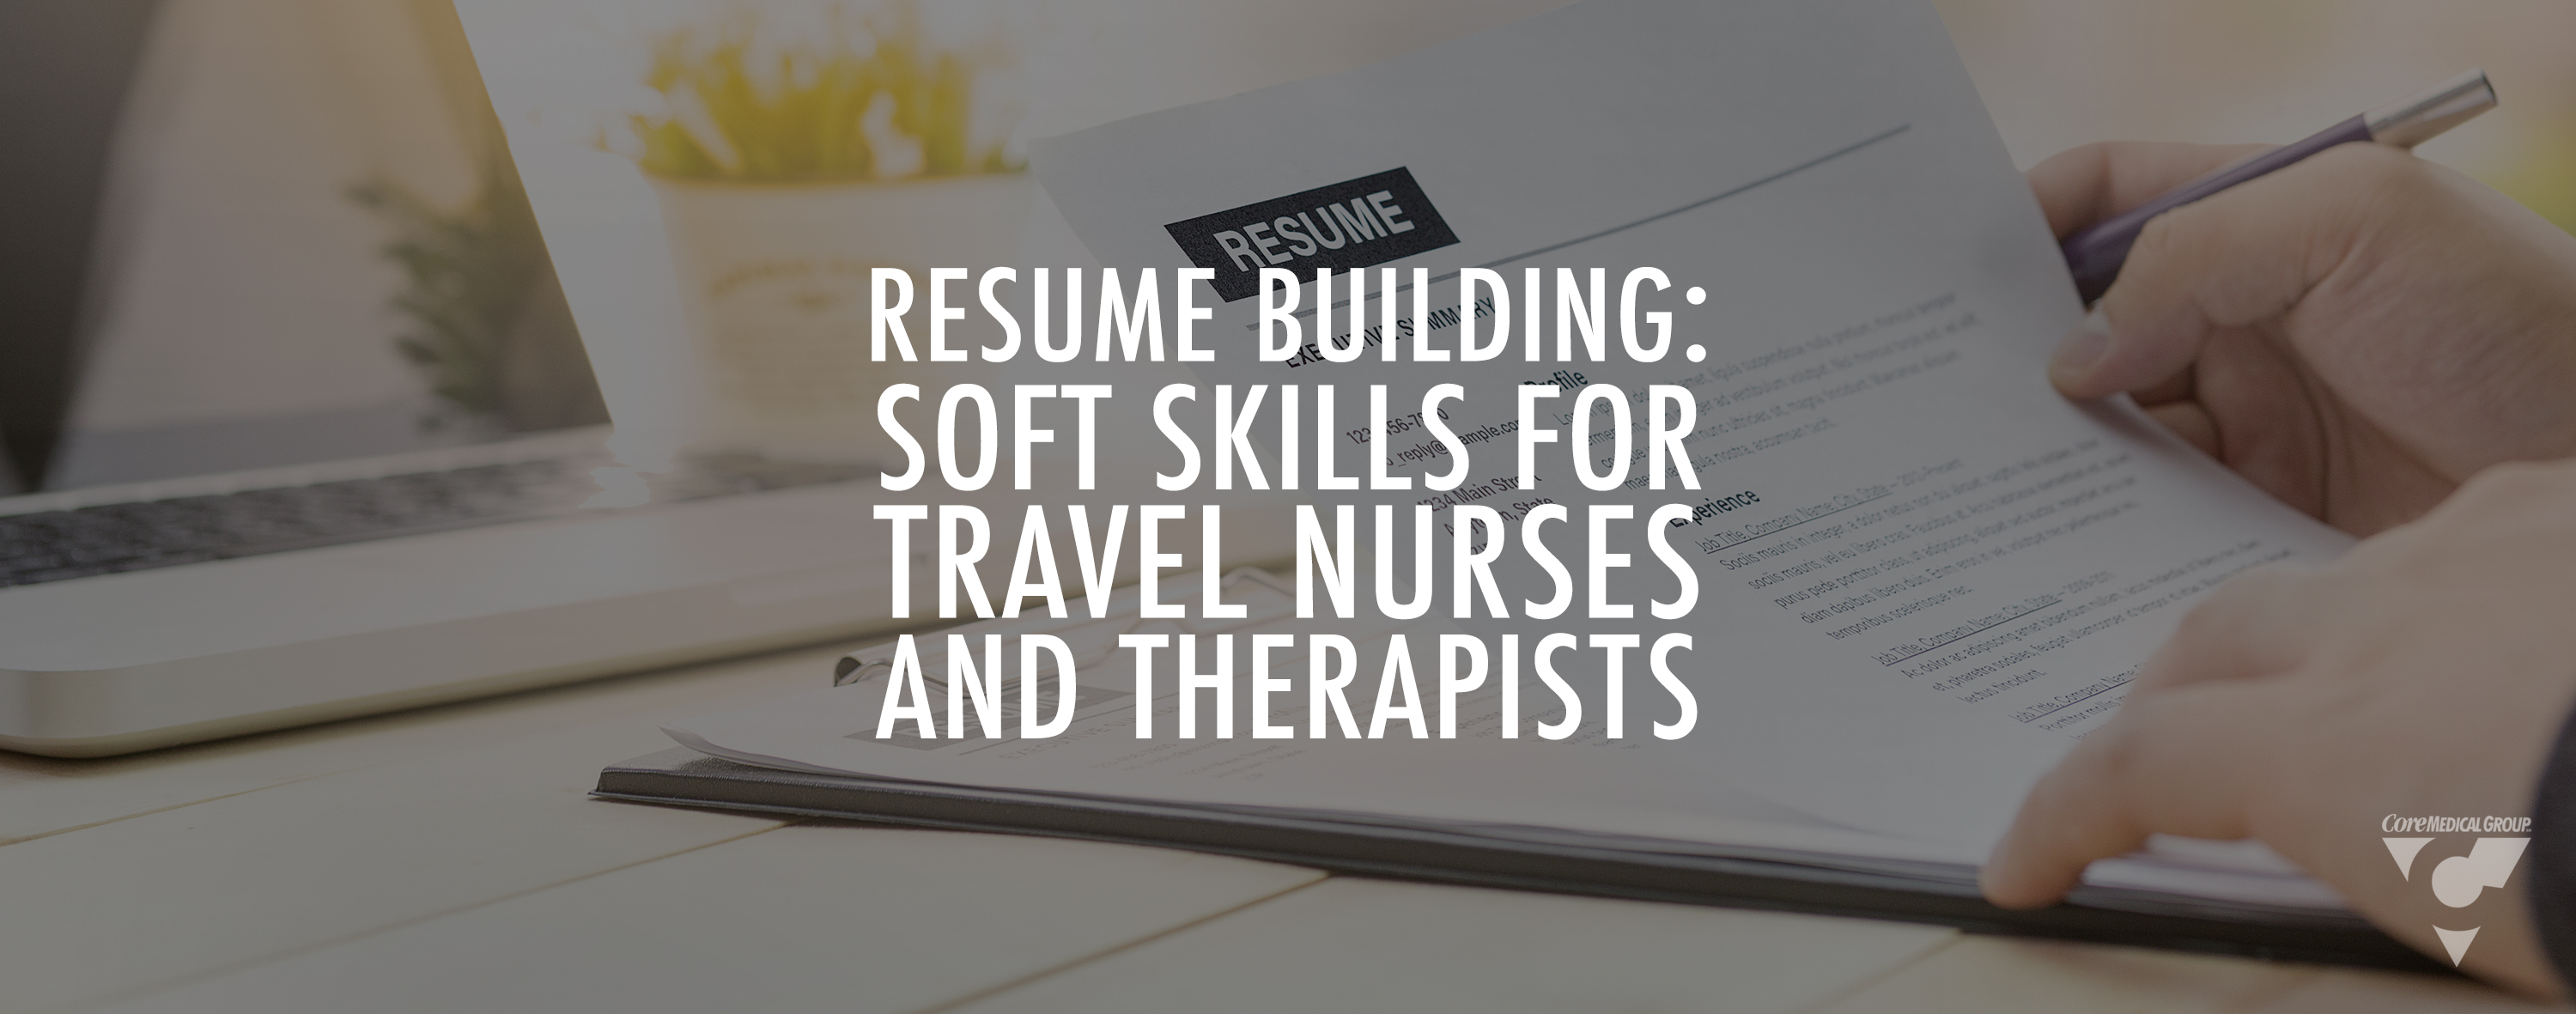 Resume Building - Soft Skills for Travel Nurses and Therapists